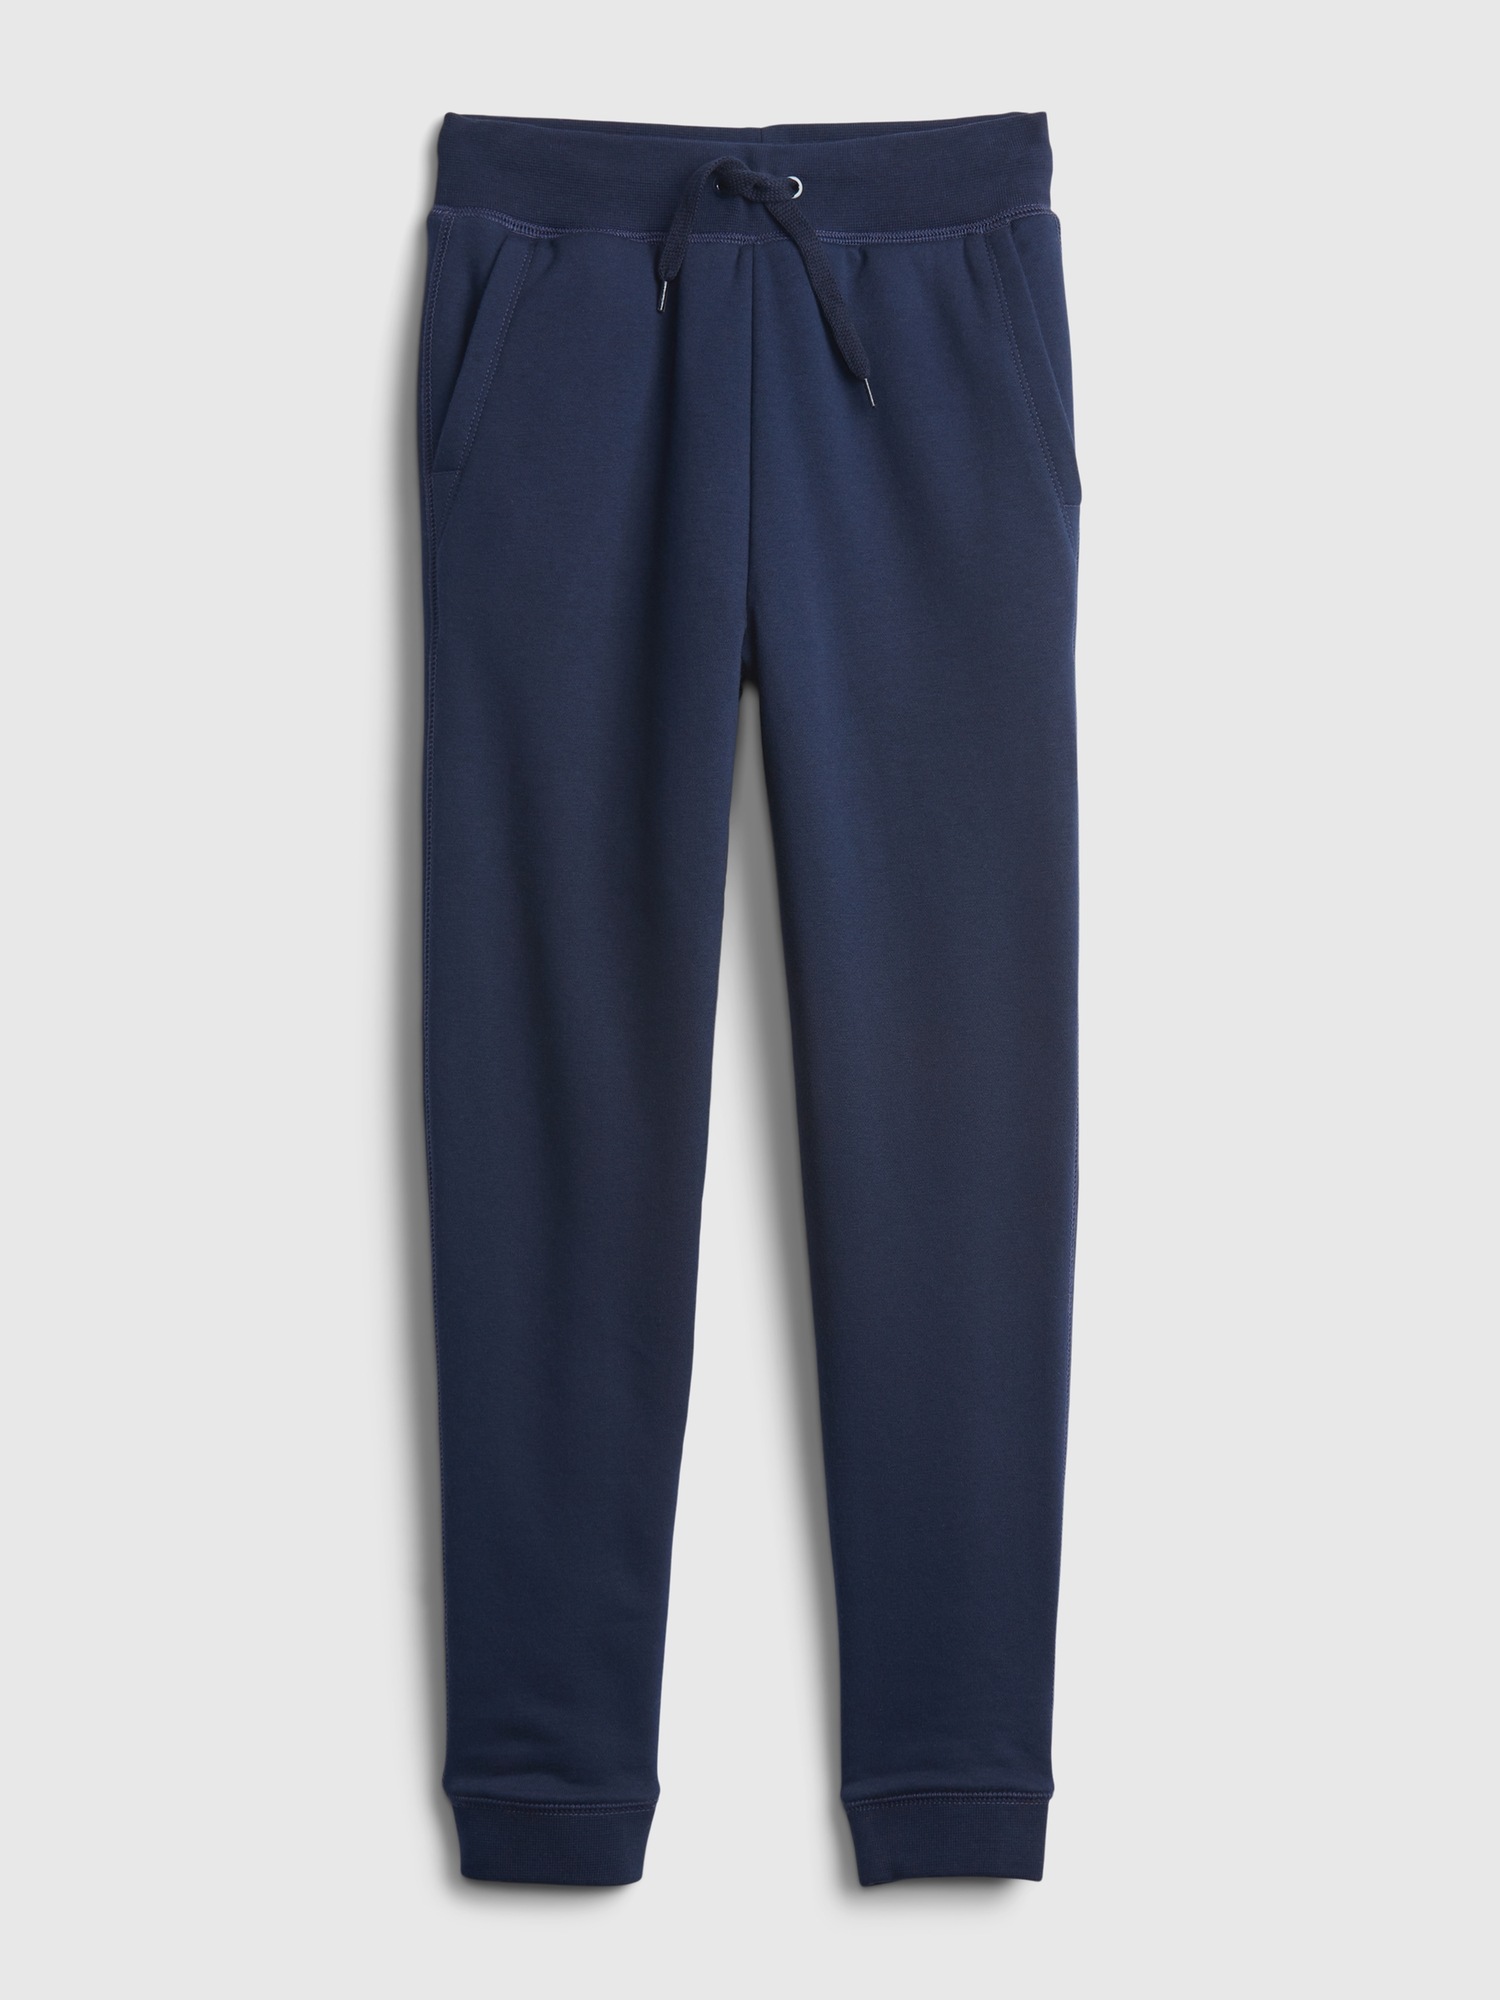 Kids Cozy Lined Joggers | Gap